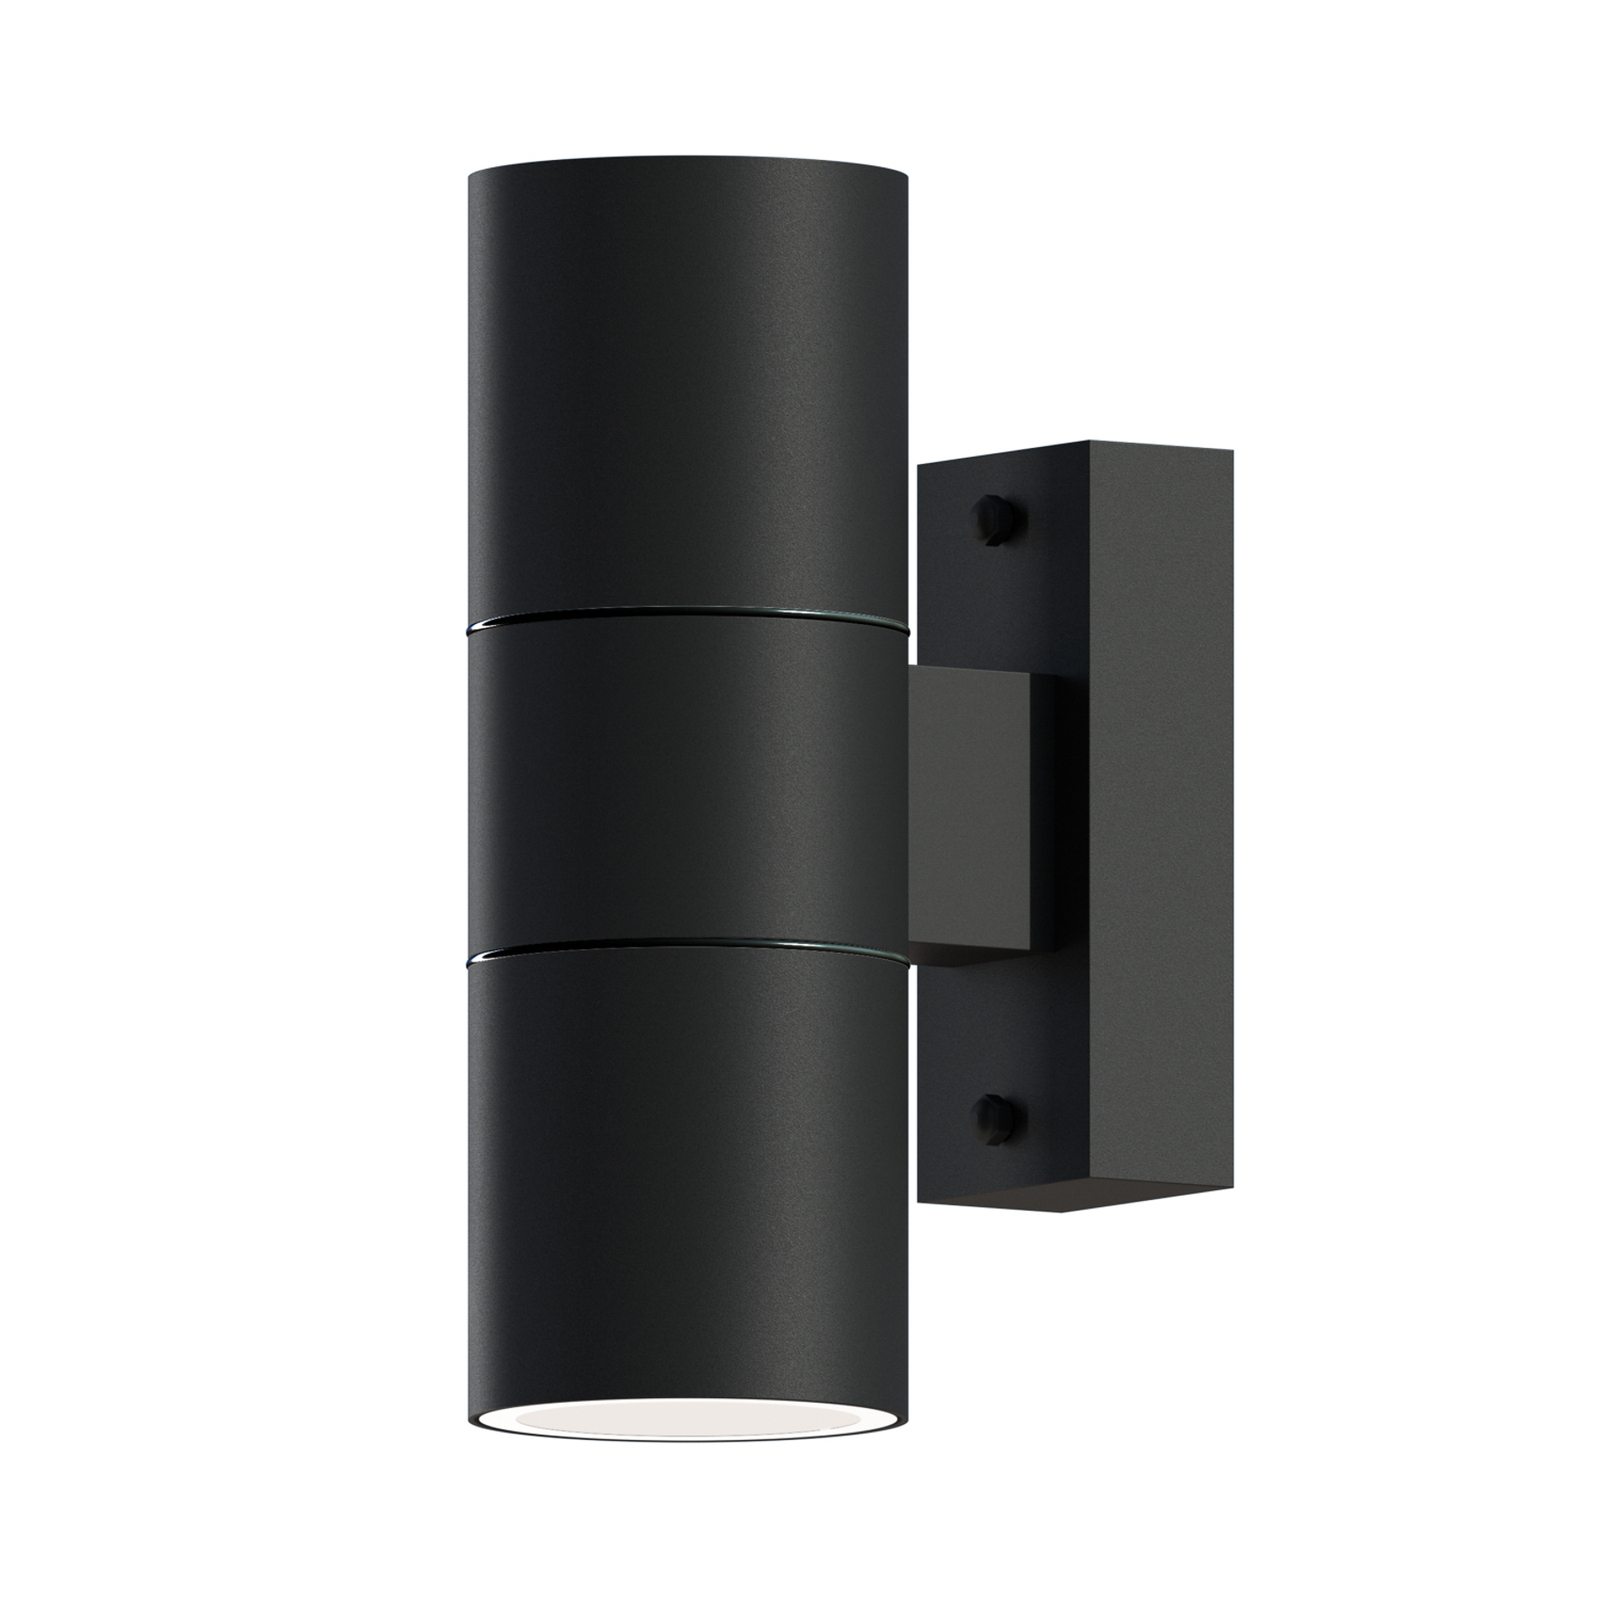 Calex outdoor wall lamp GU10 stainless steel, up/down, 17 cm, black